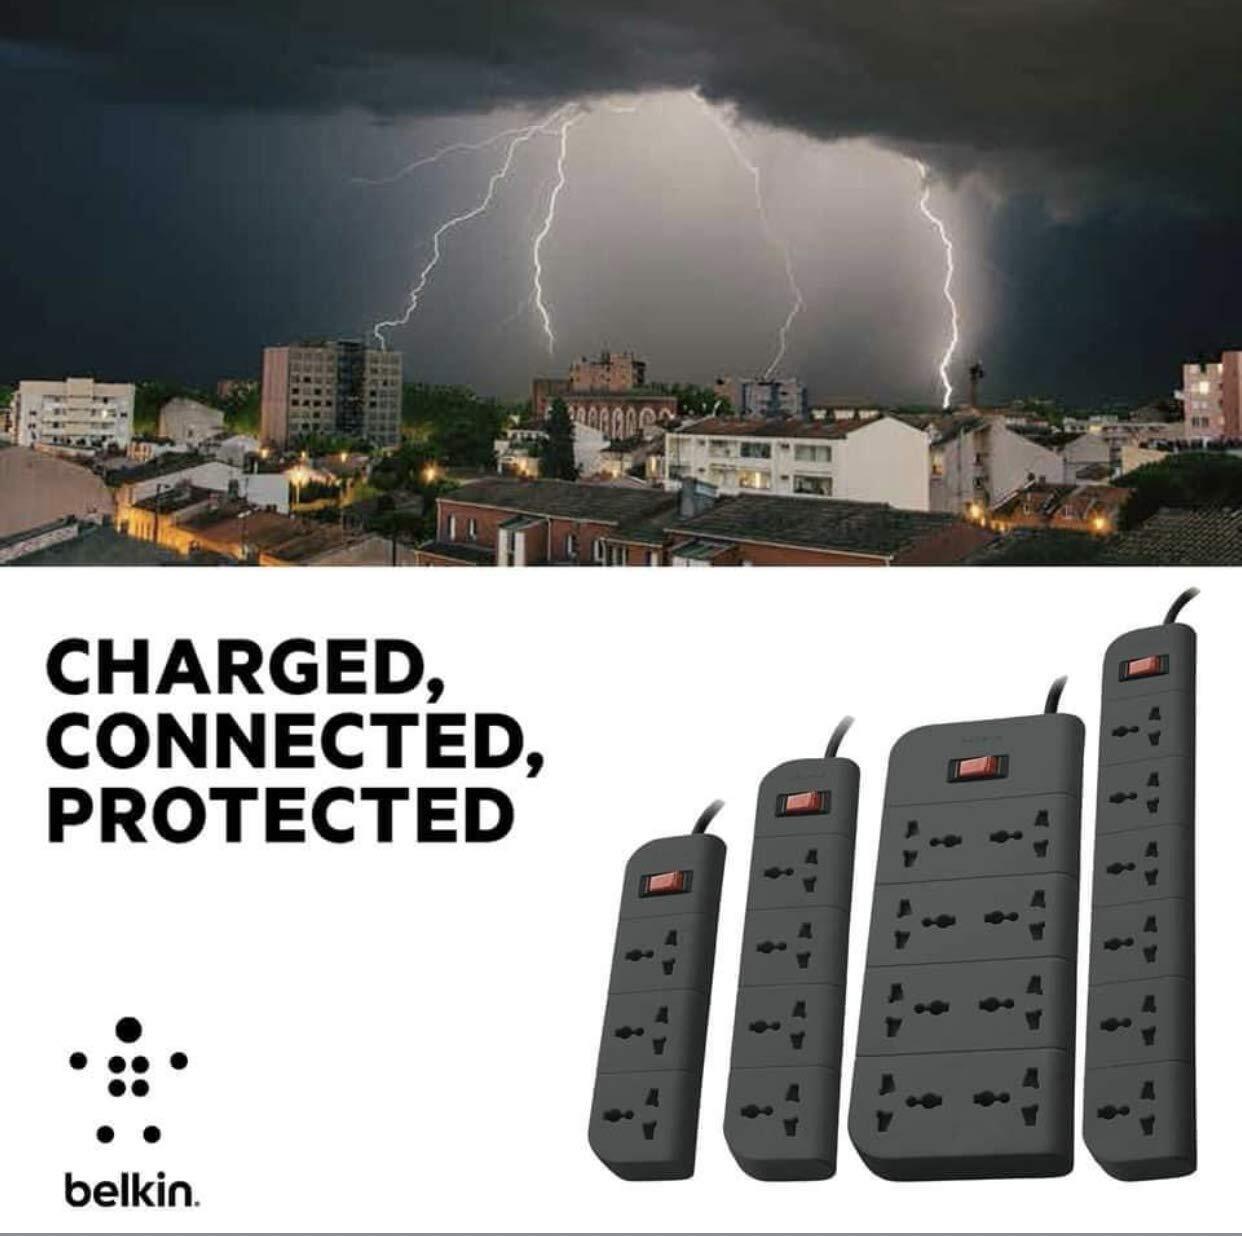 Belkin 8-Socket Surge Protector Universal Socket with 6.5ft (2-Meter) Heavy Duty Cable Overload Protection, Extension Cord Comes with 5 Years Manufacturer Warranty, Grey Color